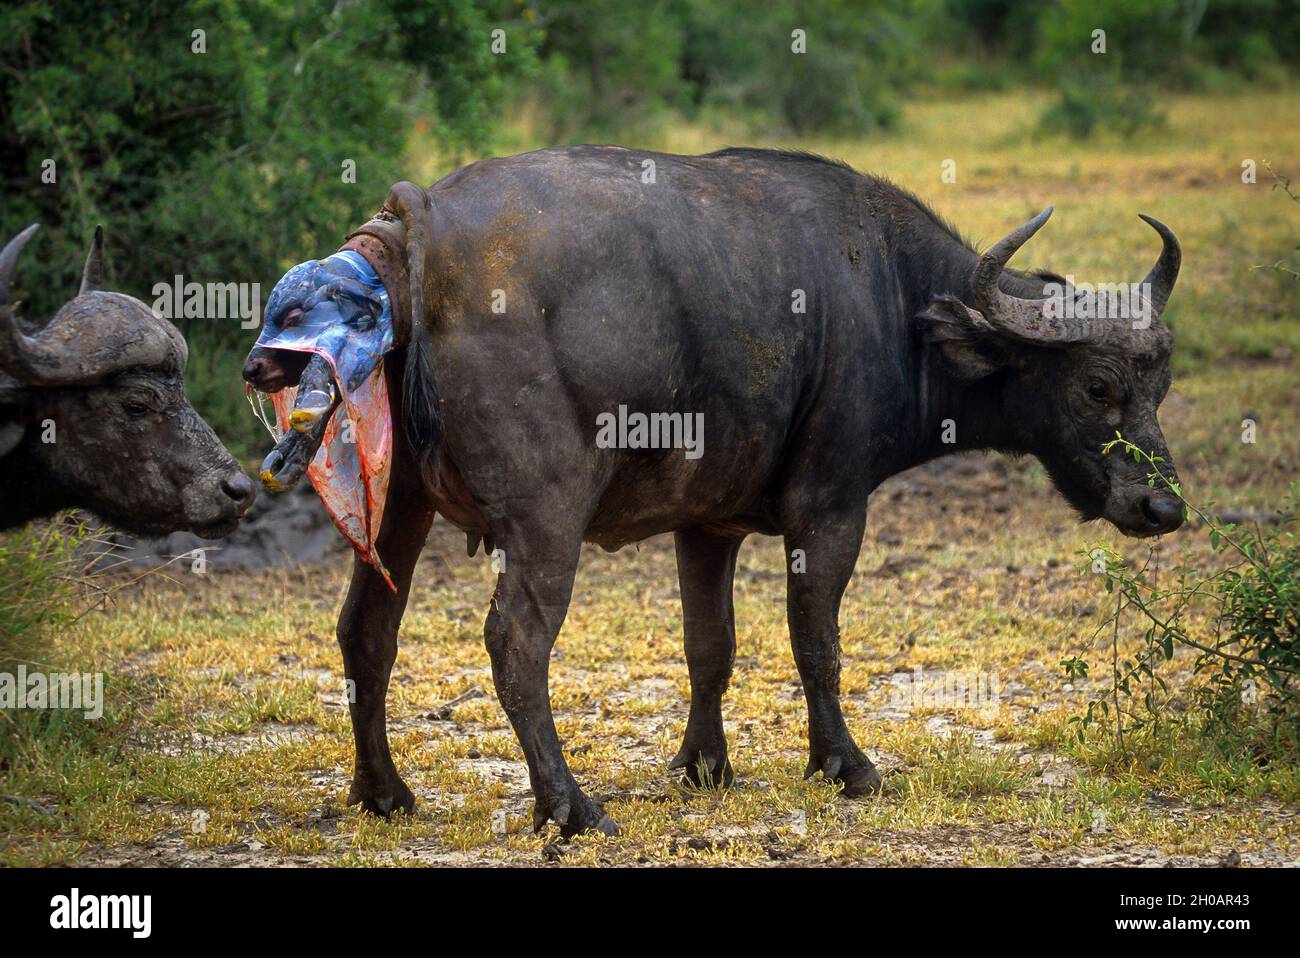 Buffalo Giving Birth High Resolution Stock and Images - Alamy